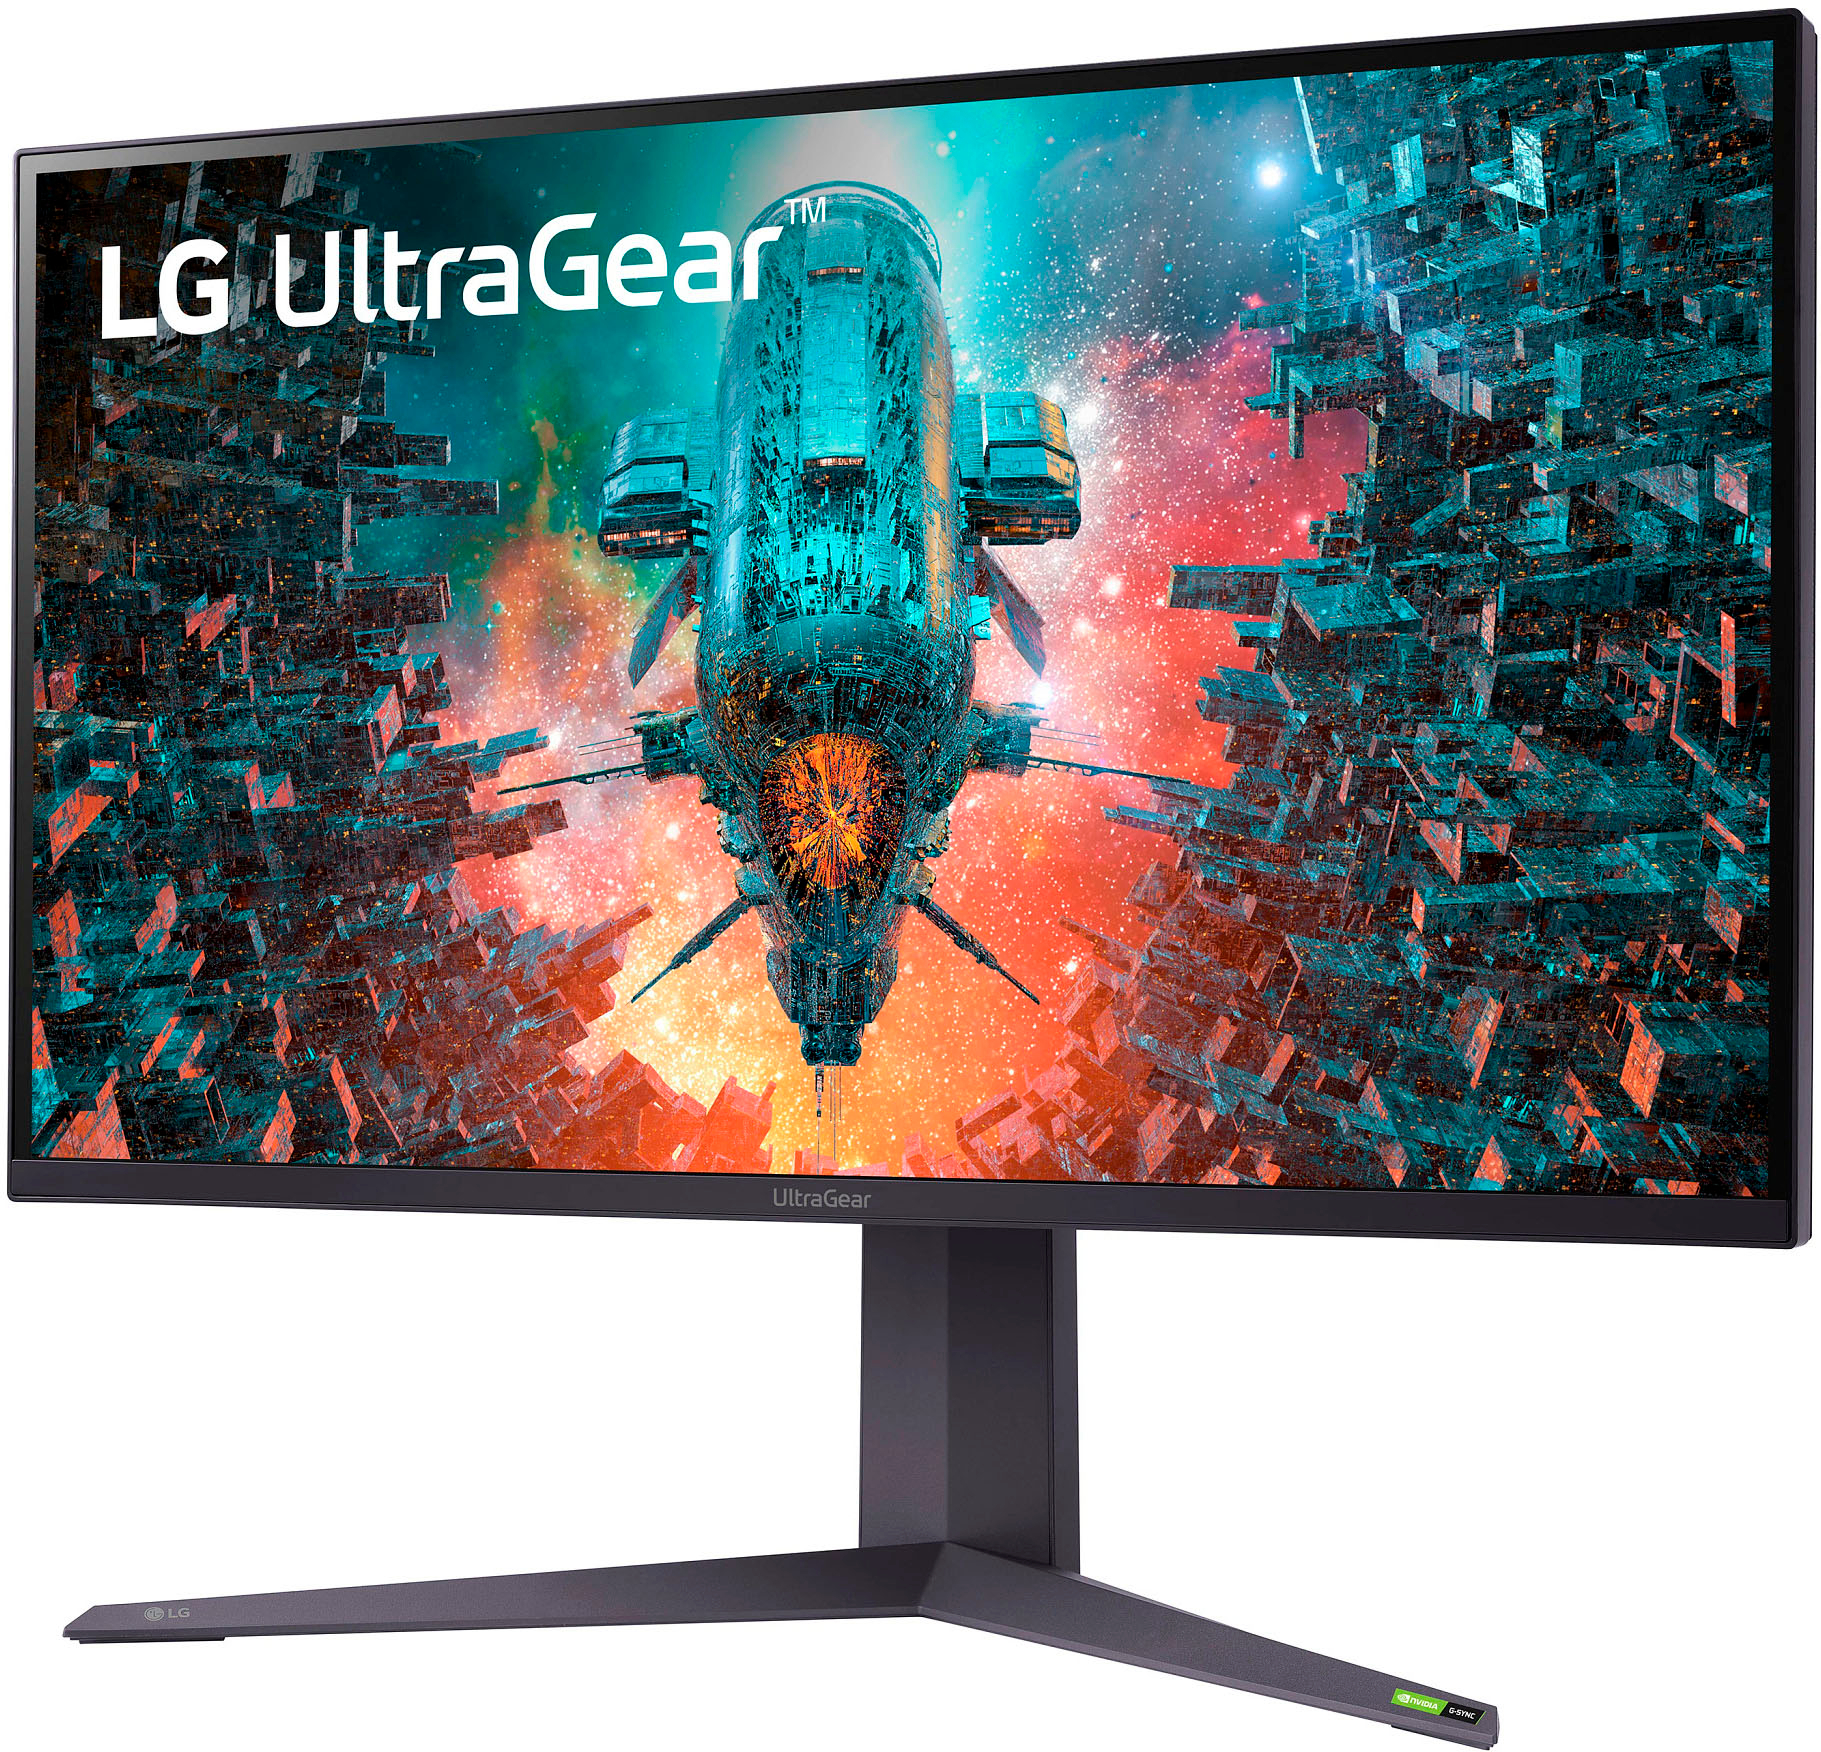 Angle View: LG - UltraGear 32" IPS LED 4K UHD G-SYNC Compatible and AMD FreeSync Premium Pro Monitor with HDR (HDMI, DisplayPort)